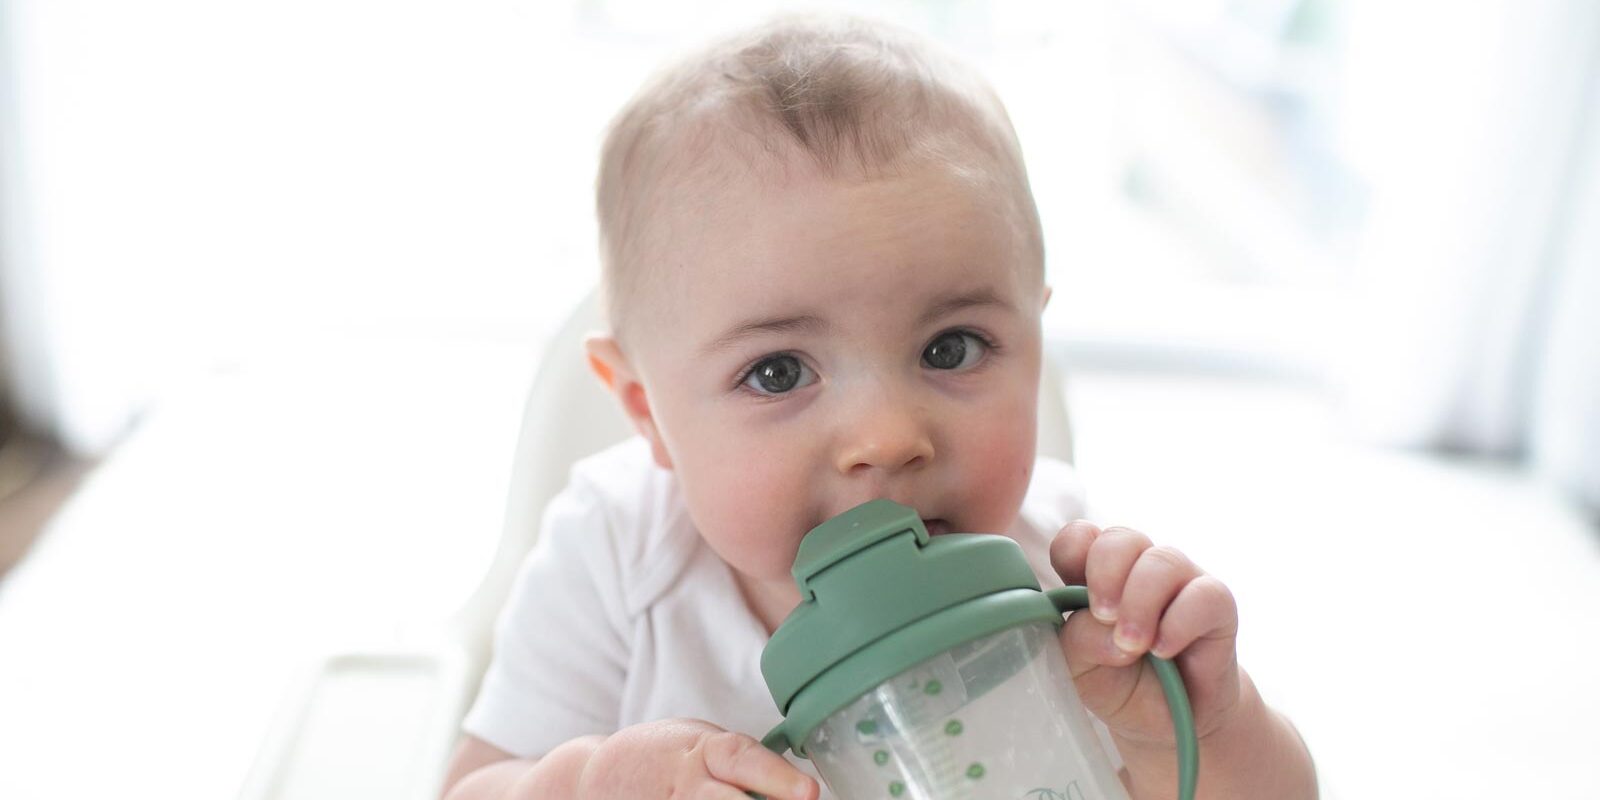 Infant holding and sucking on a straw cup